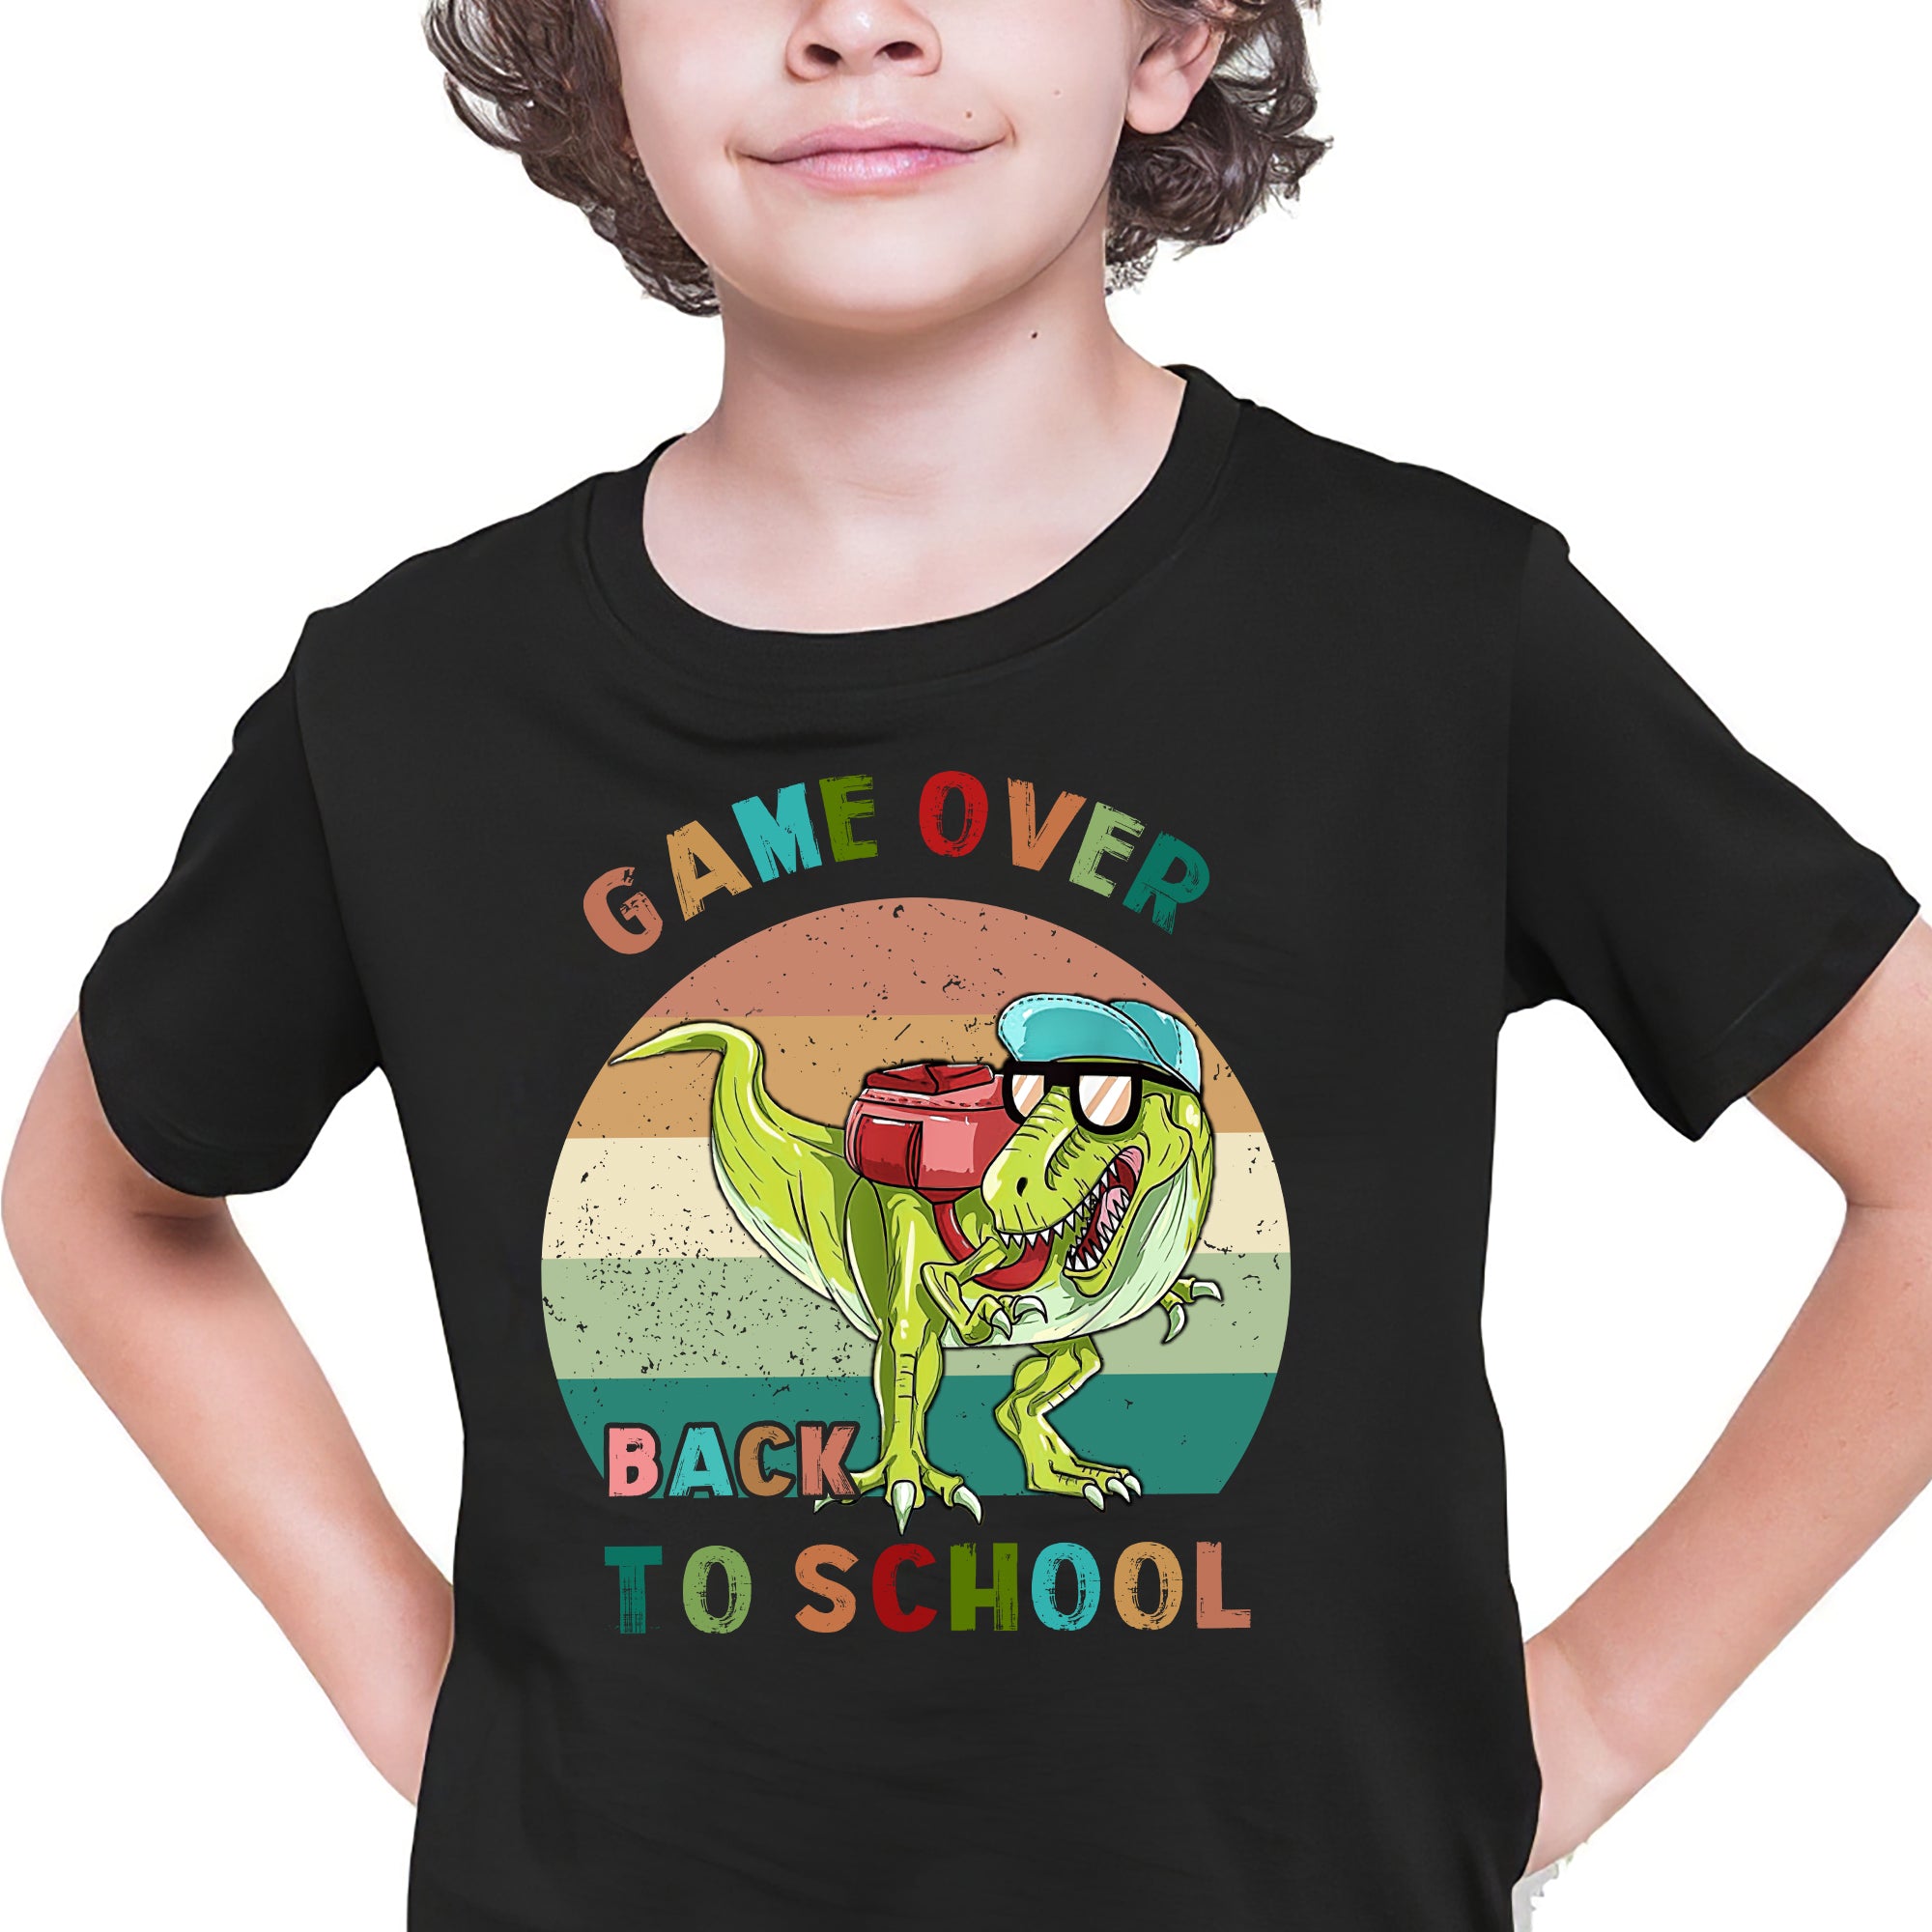 Dinosaur - Game over Back to school- Kid Apparel